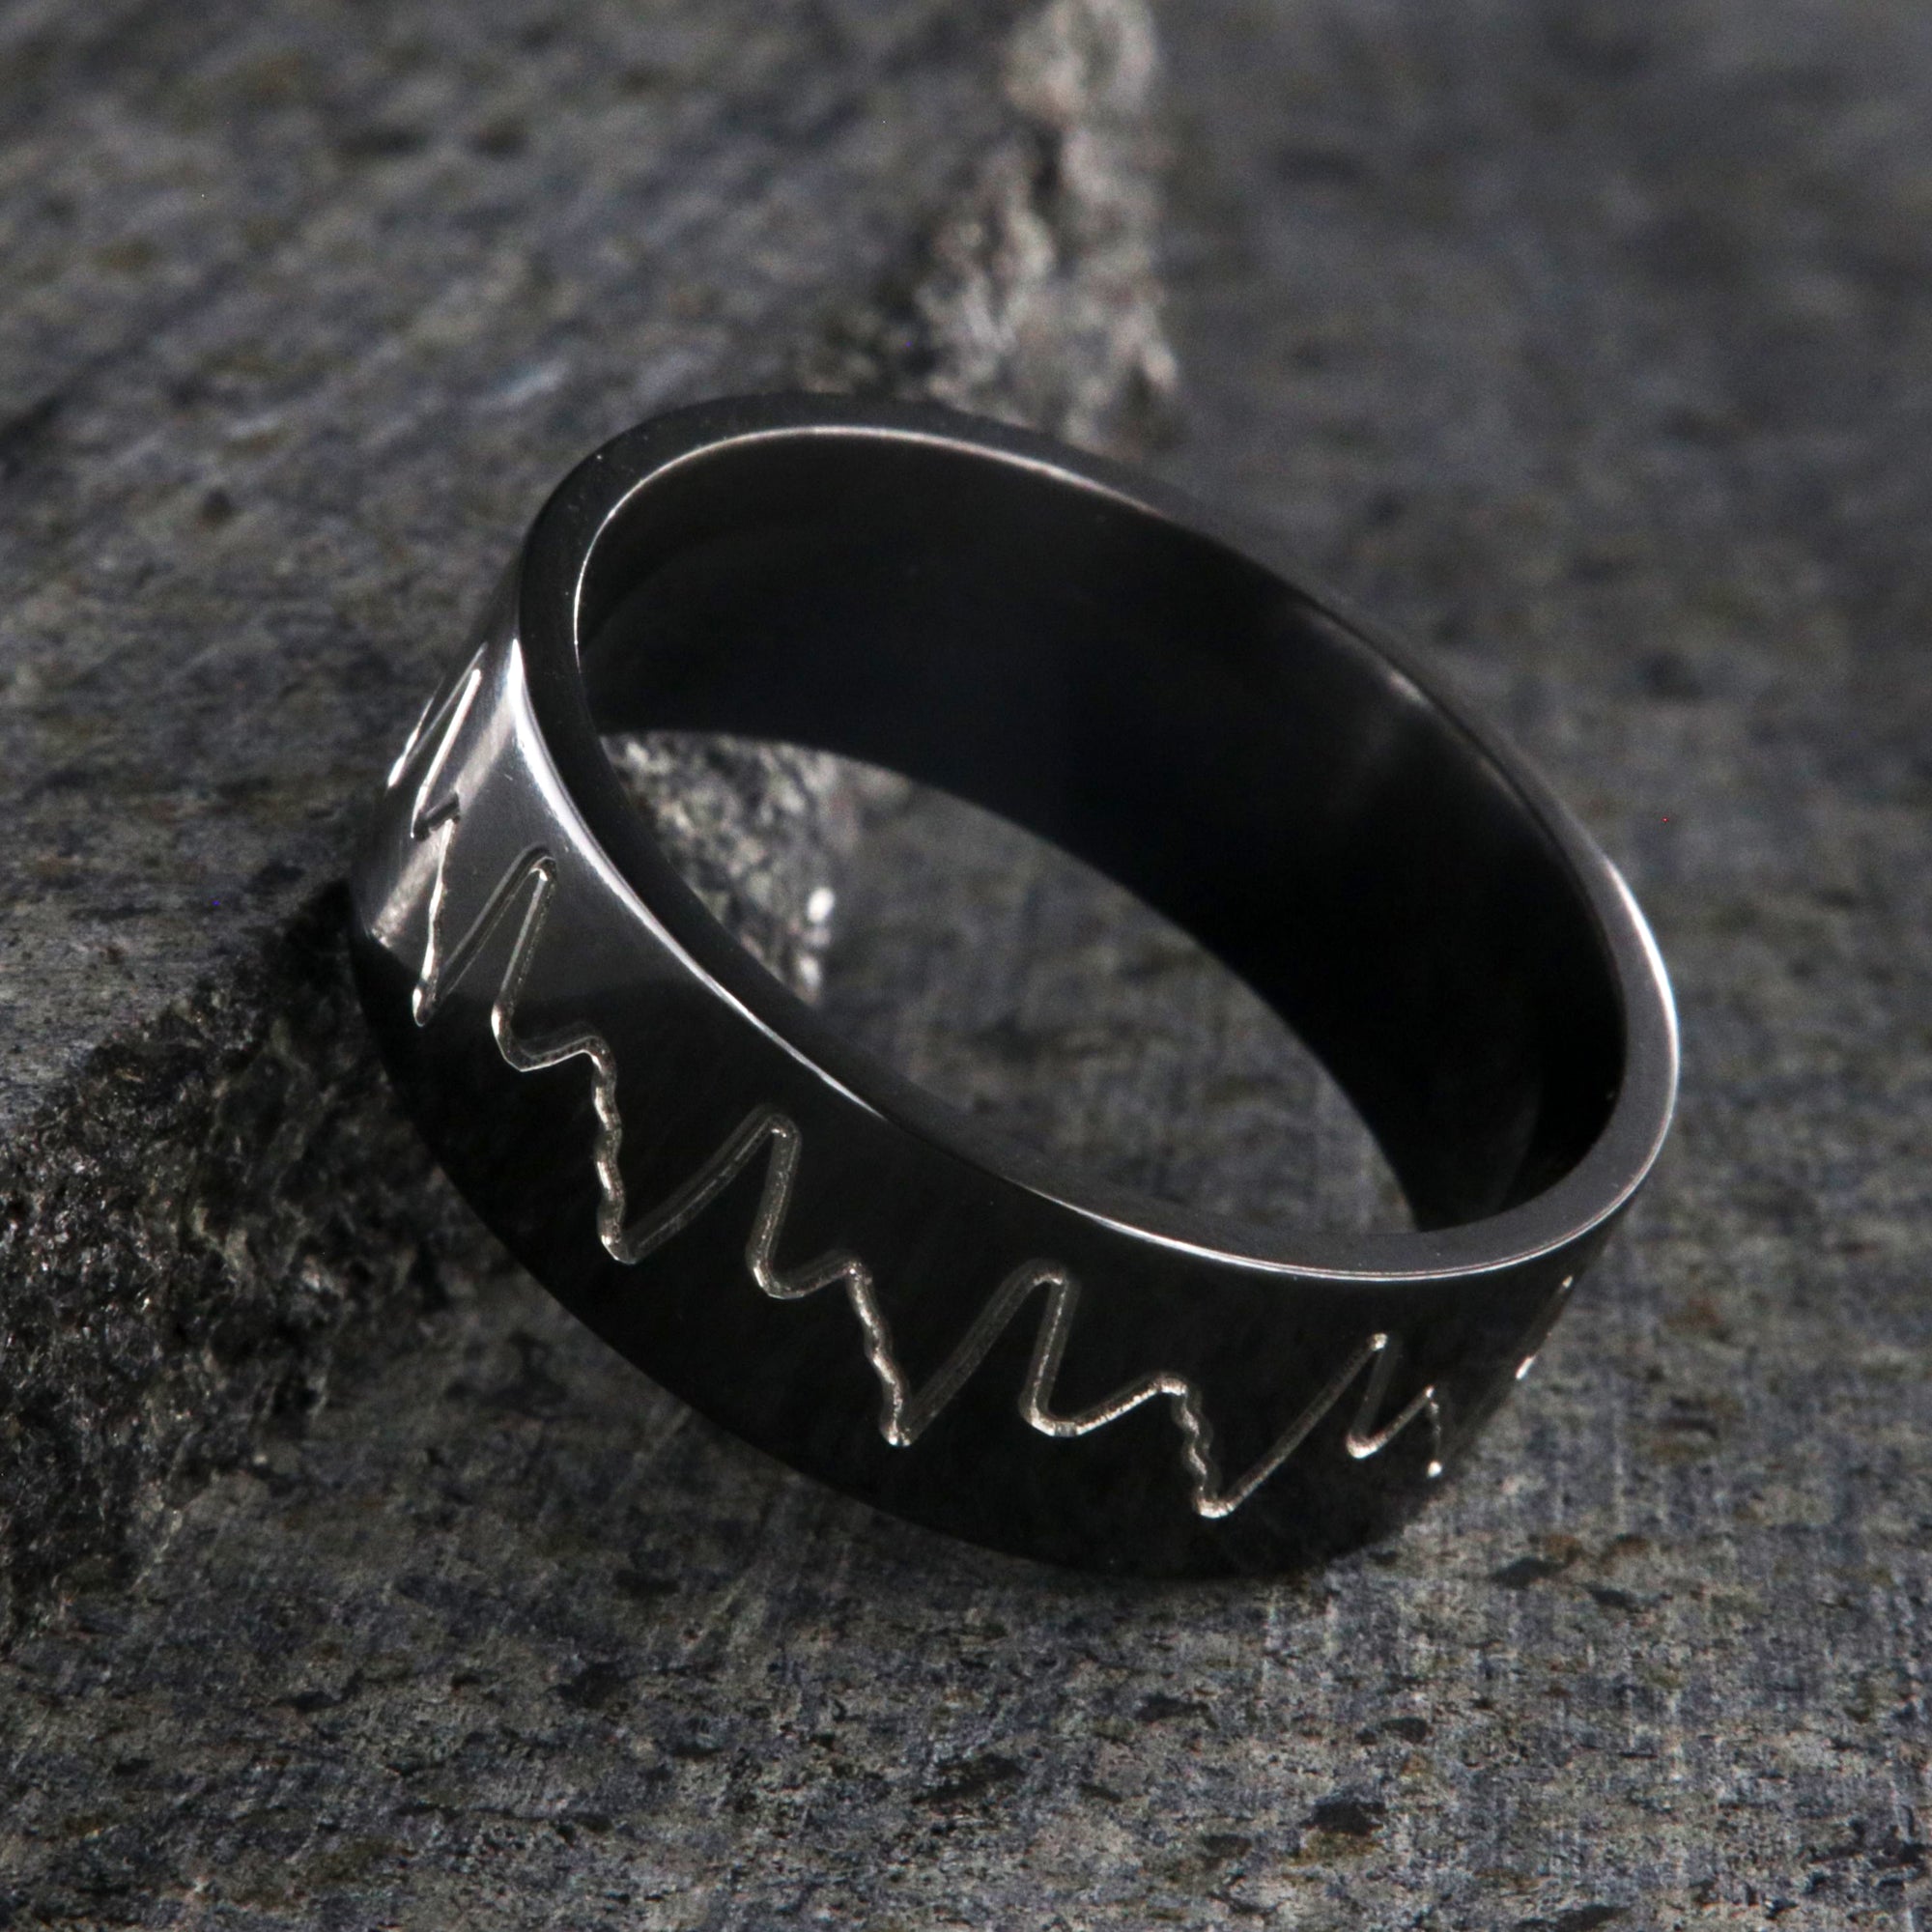 8mm wide black zirconium wedding band with an etched heartbeat design and a flat profile